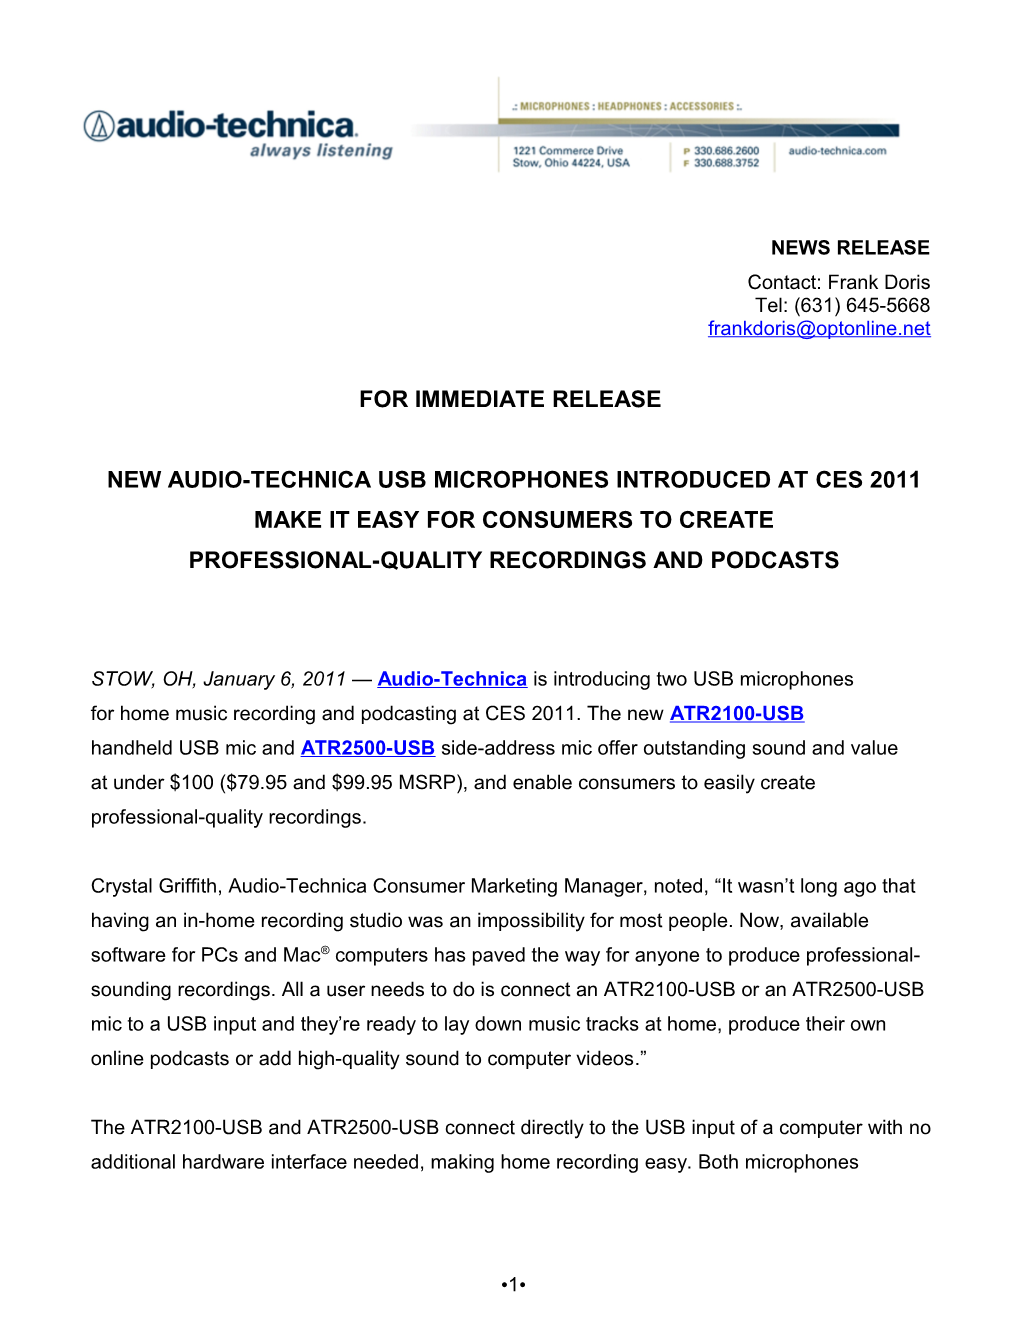 Audio-Technica USB Mics Press Release for CES Daily